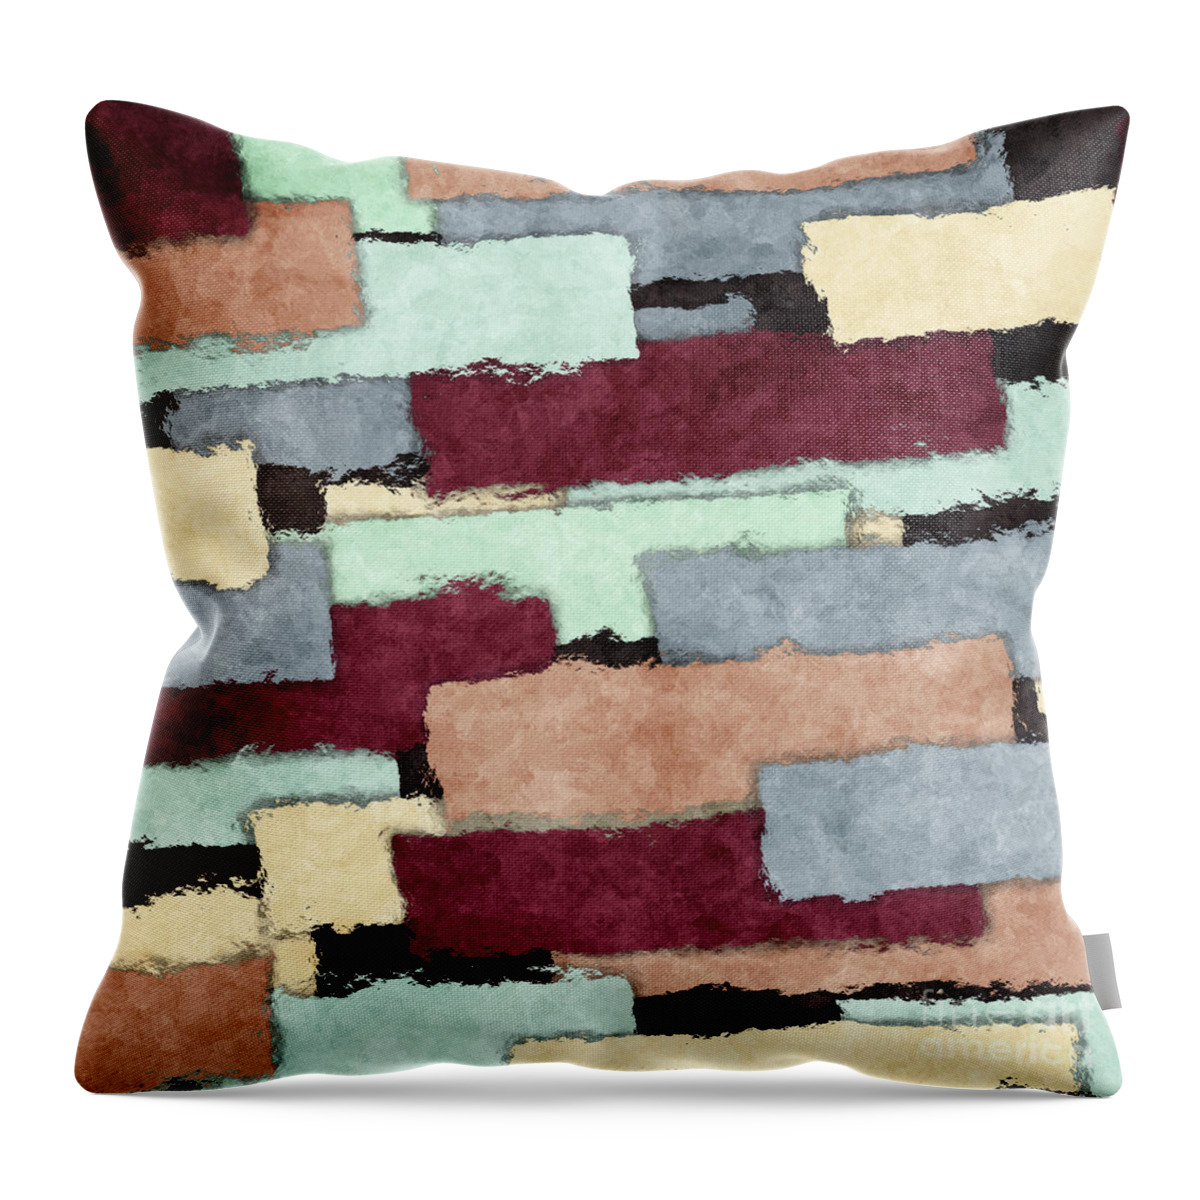 Pattern Throw Pillow featuring the digital art Abstract Patchwork by Phil Perkins